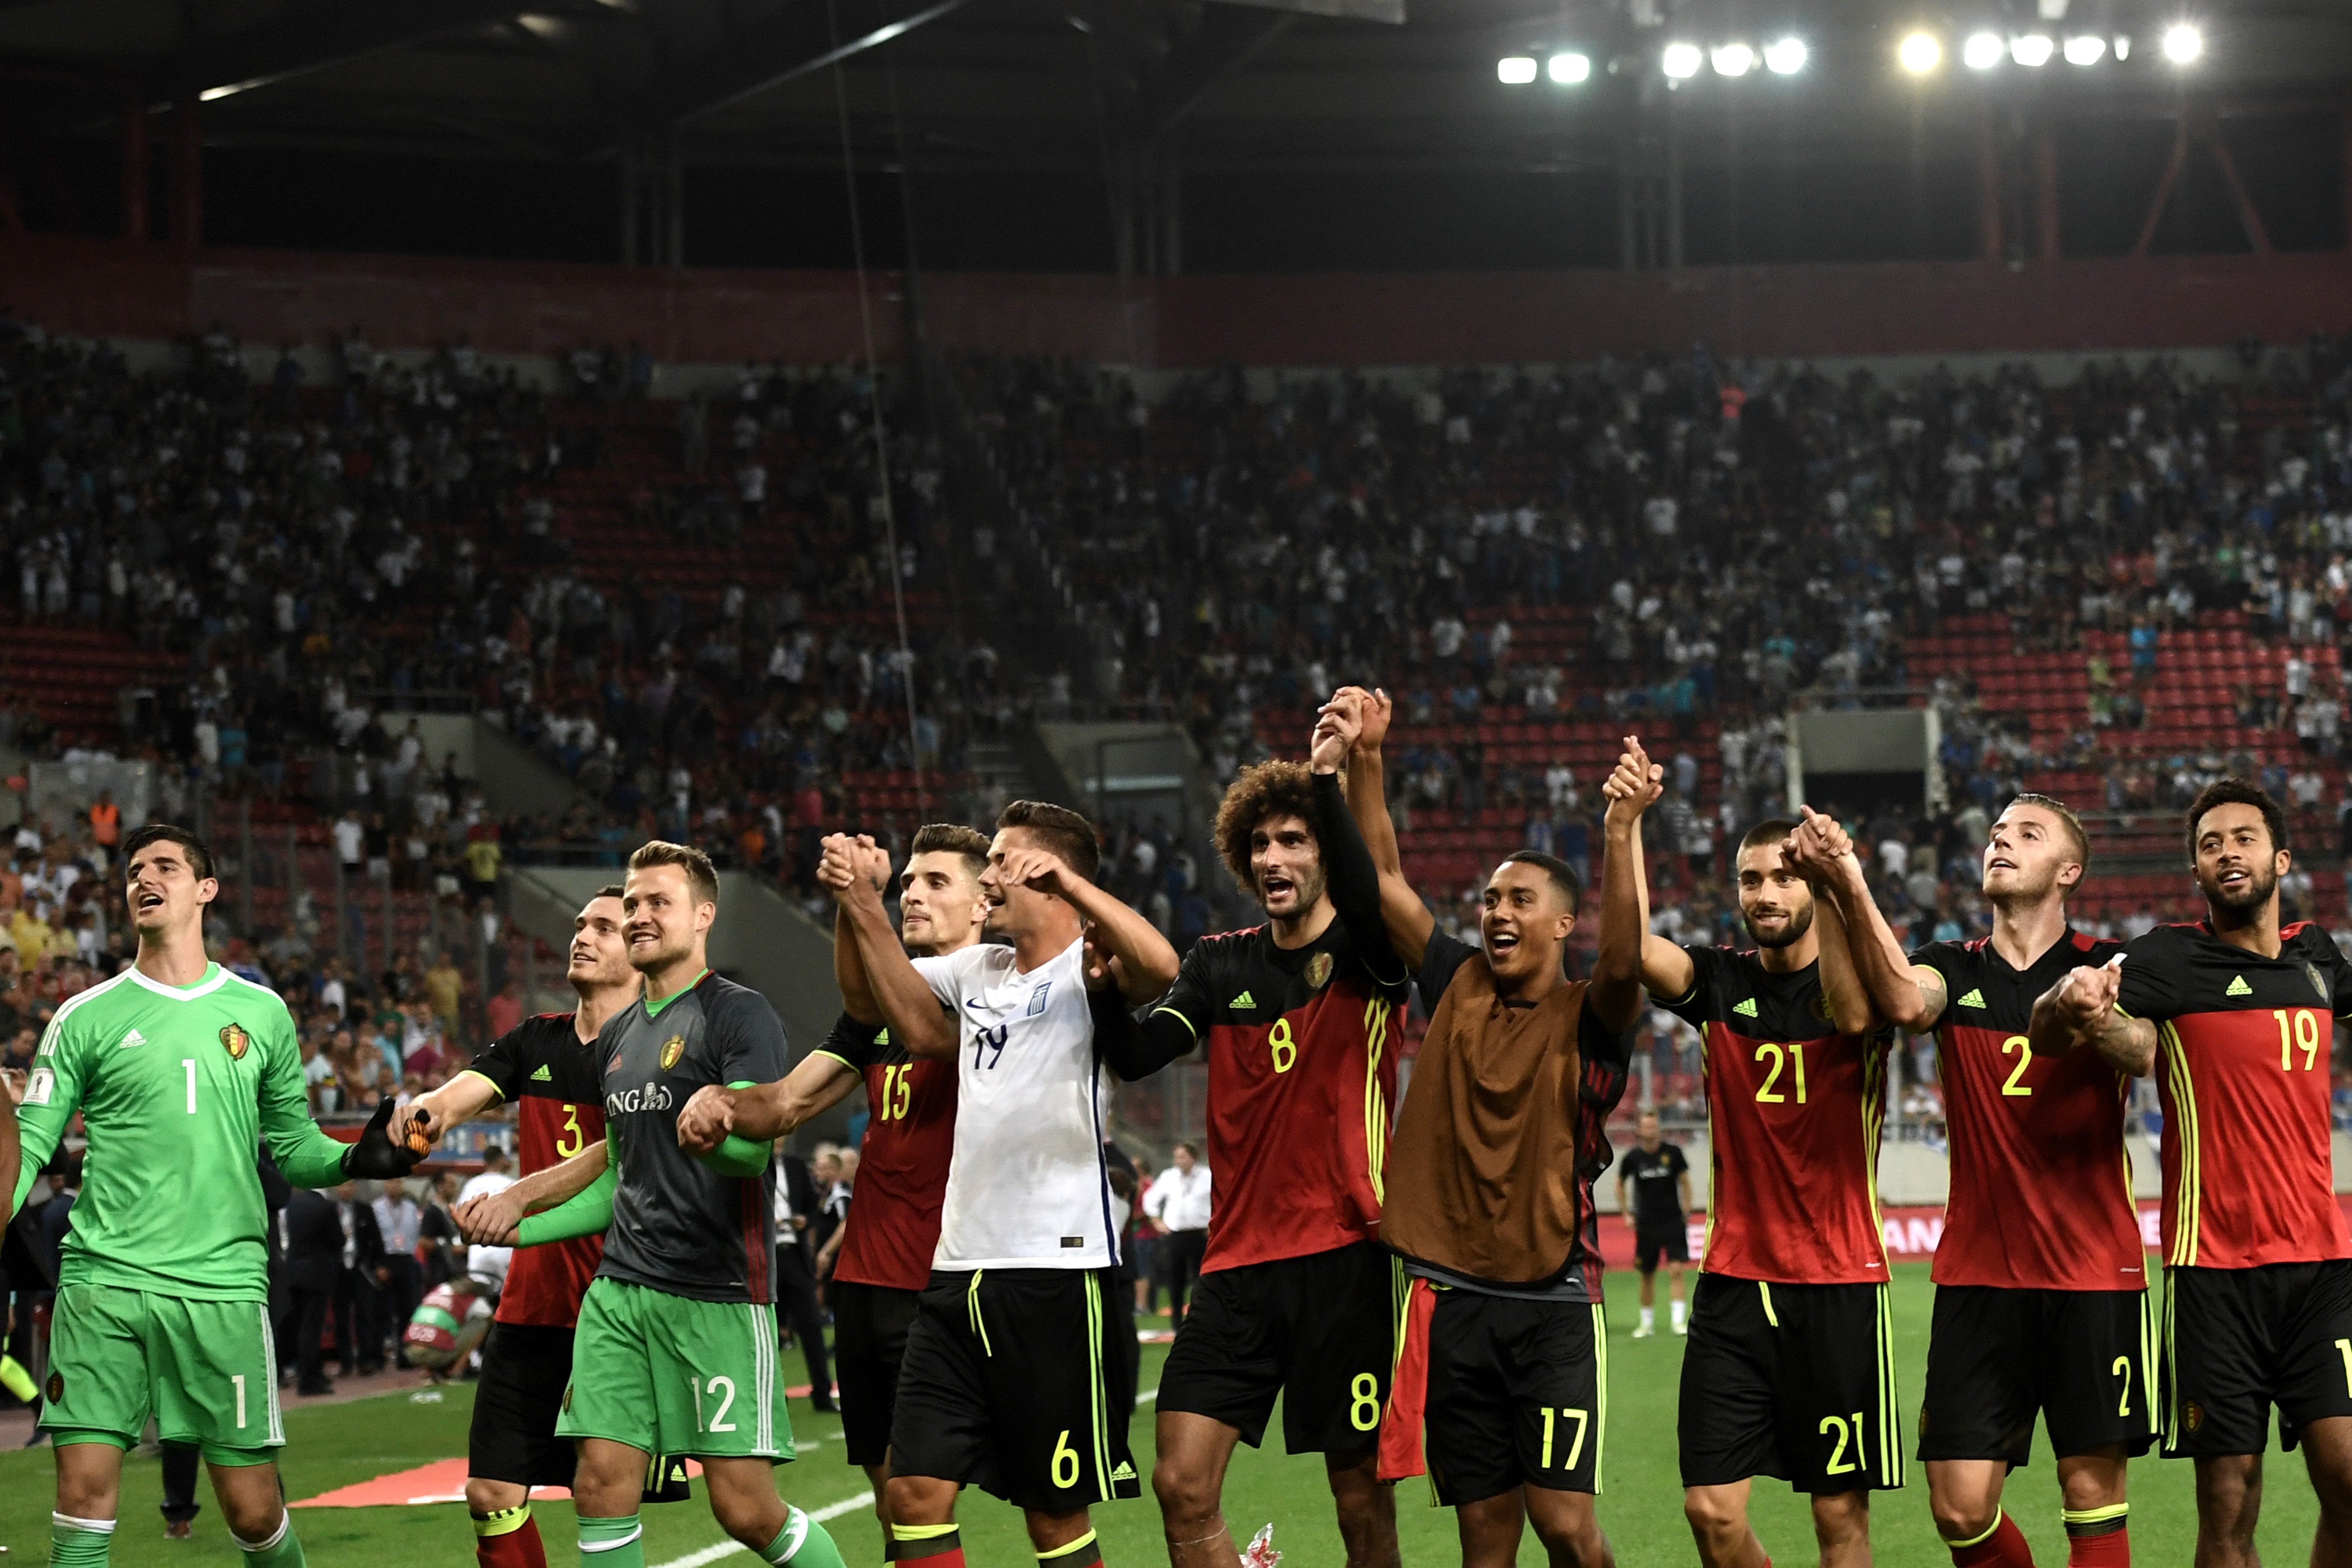 Belgium's players including Marouane Fellani (C) celebrate after their team's victory against Greece in their Group H 2018 FIFA World Cup qualifying football match between Greece and Belgium at The Georgios Karaiskakis Stadium in Piraeus near Athens on September 3, 2017. / AFP PHOTO / ARIS MESSINIS        (Photo credit should read ARIS MESSINIS/AFP/Getty Images)